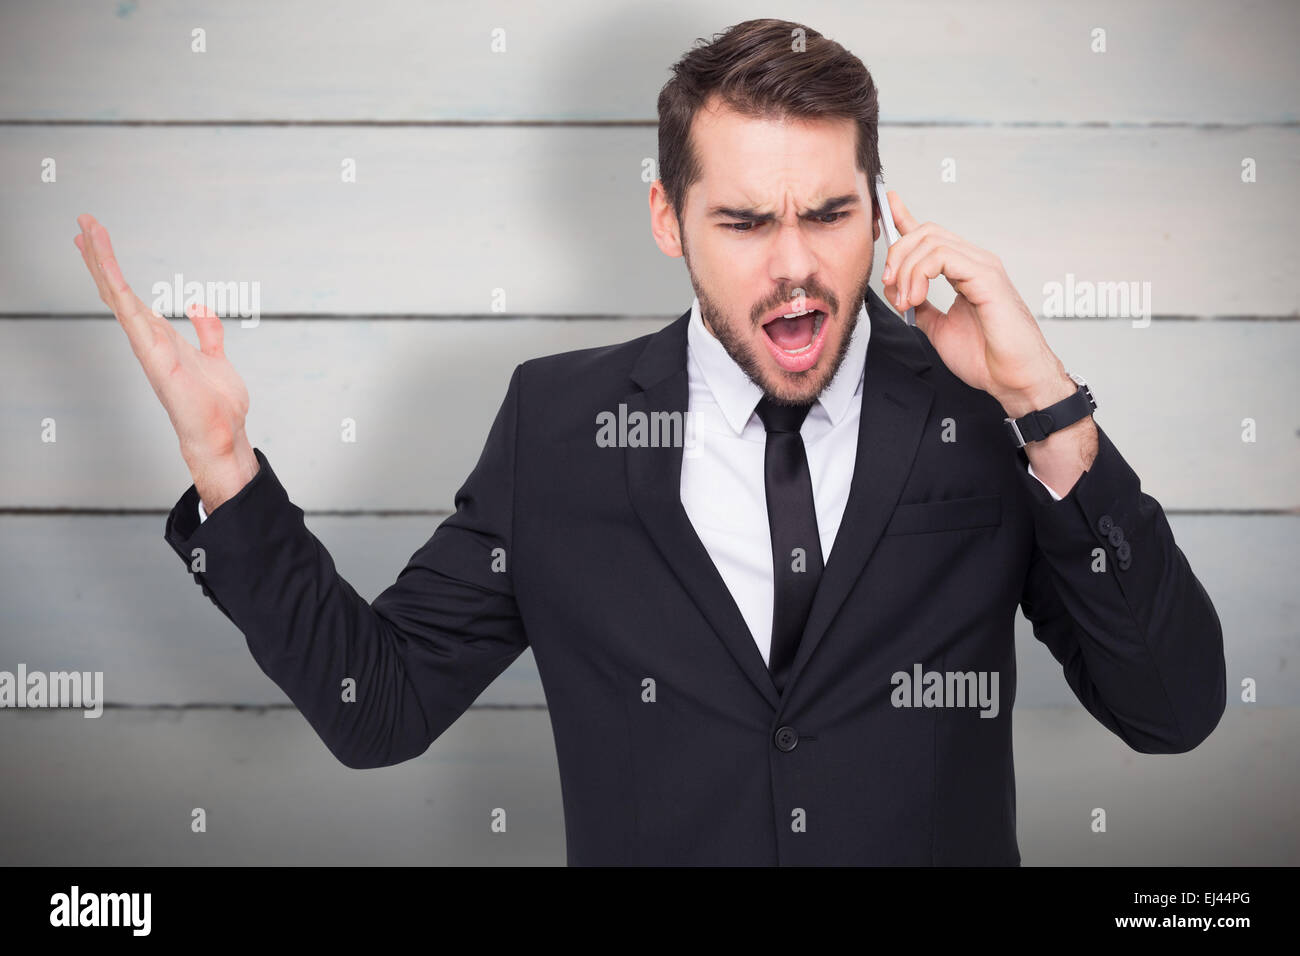 Composite image of angry businessman gesturing on the phone Stock Photo